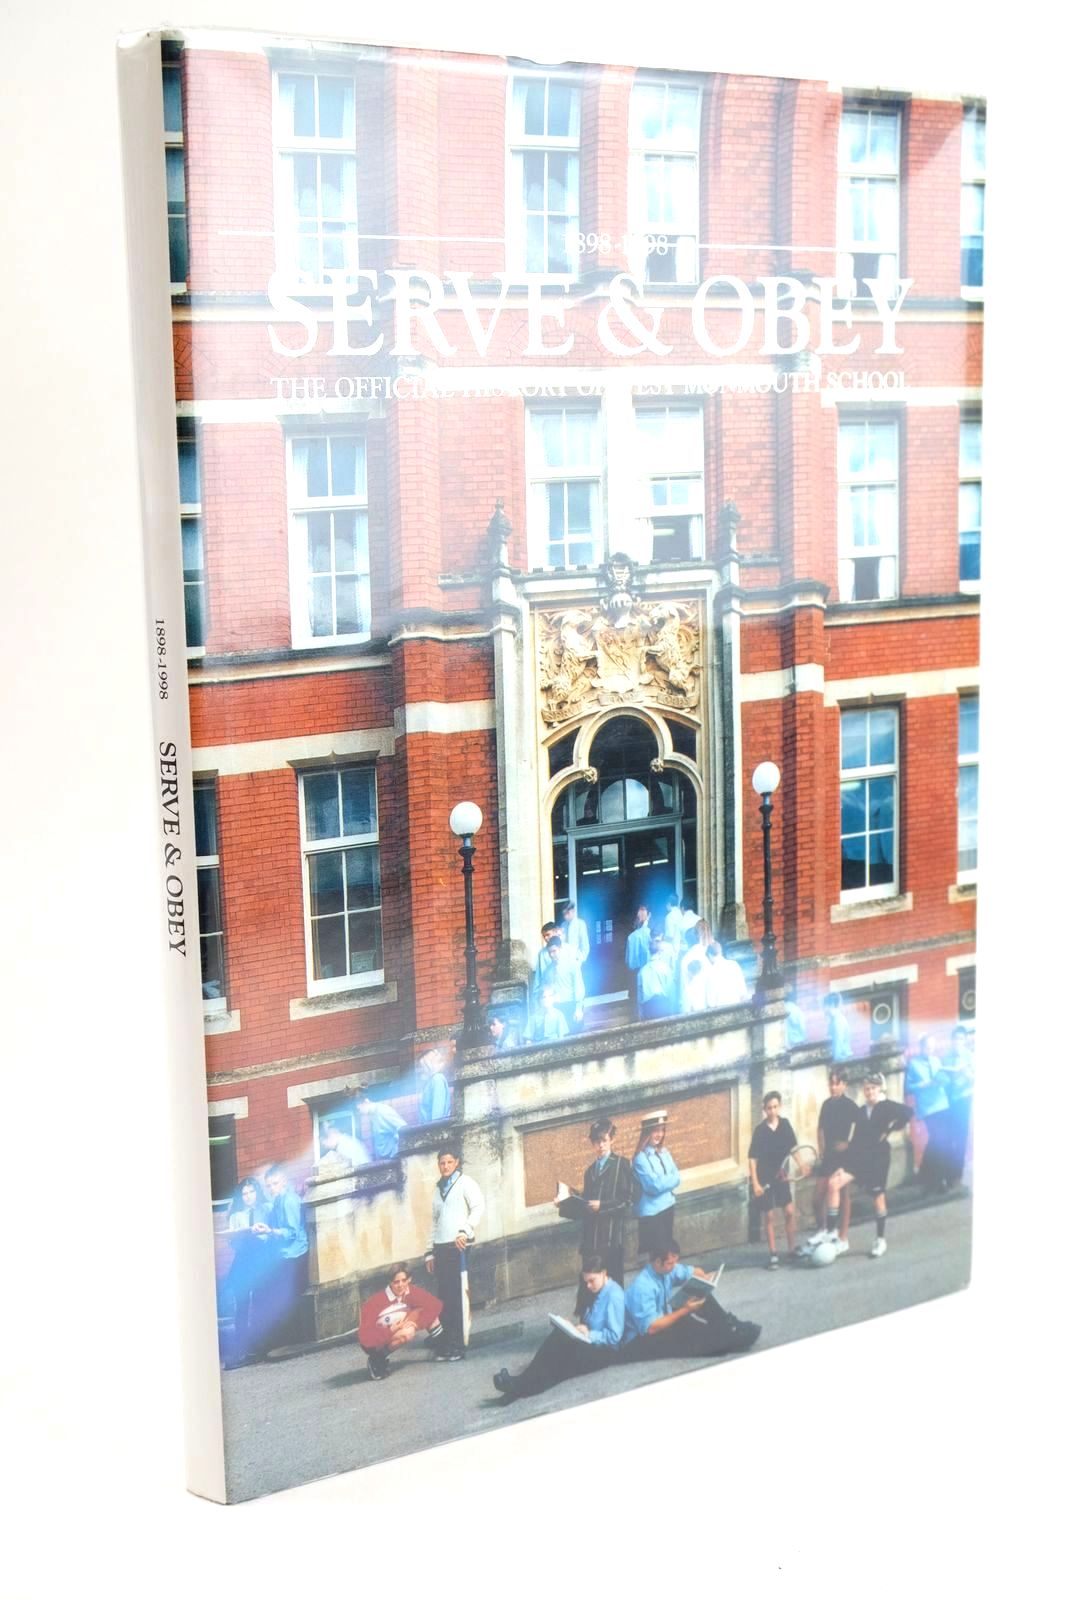 Photo of 1898-1998 SERVE & OBEY: THE OFFICIAL HISTORY OF WEST MONMOUTH SCHOOL written by Crane, Arthur published by West Monmouth School (STOCK CODE: 1323411)  for sale by Stella & Rose's Books